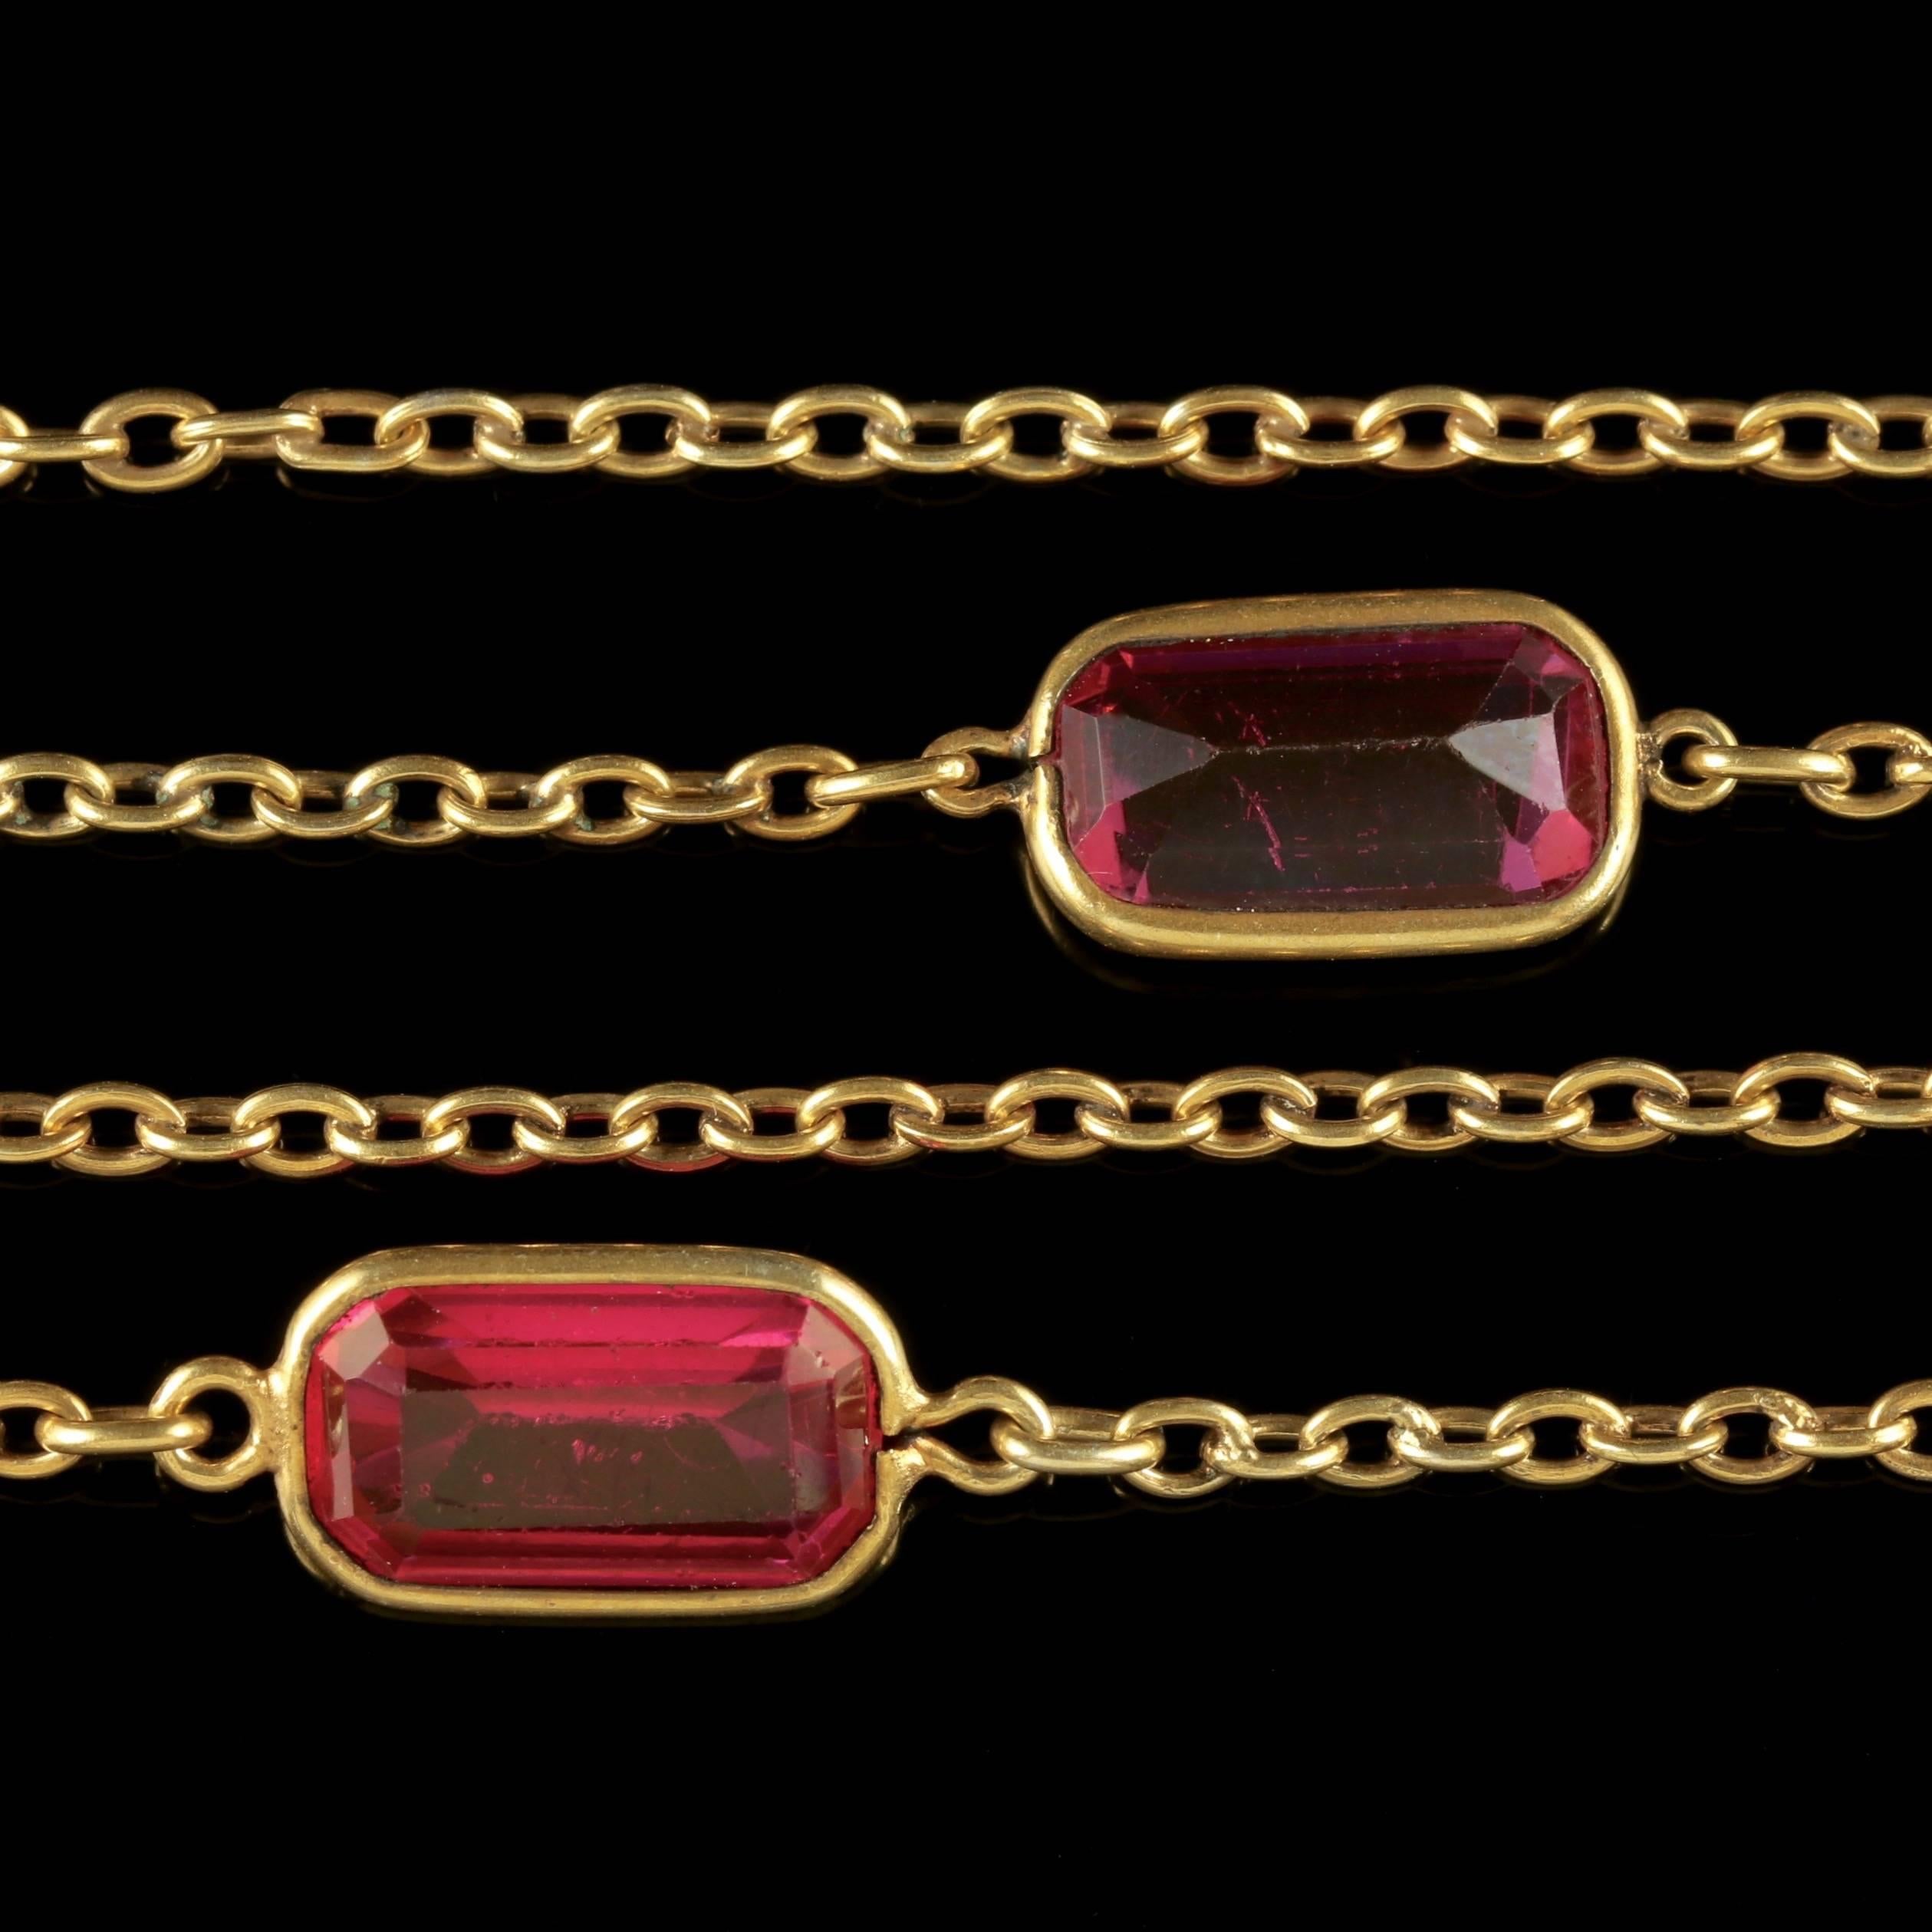 Antique Victorian Guard Chain Pink Paste Necklace, circa 1900 In Excellent Condition For Sale In Lancaster, Lancashire